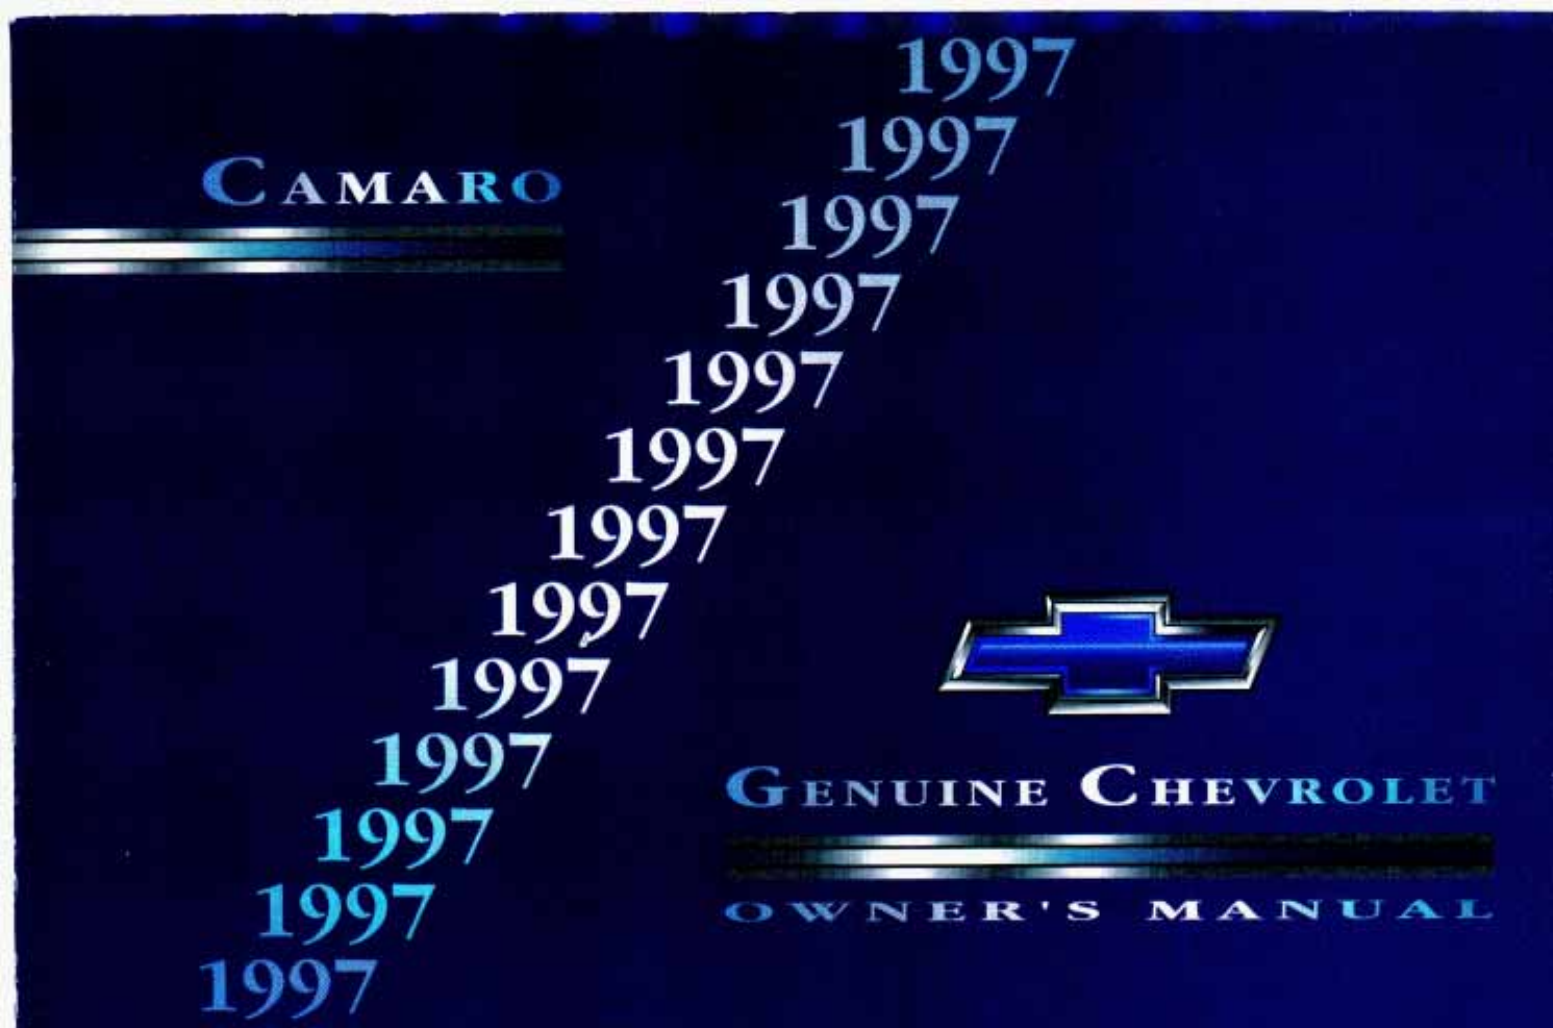 1997 Chevrolet Camaro owners manual Preview image 1